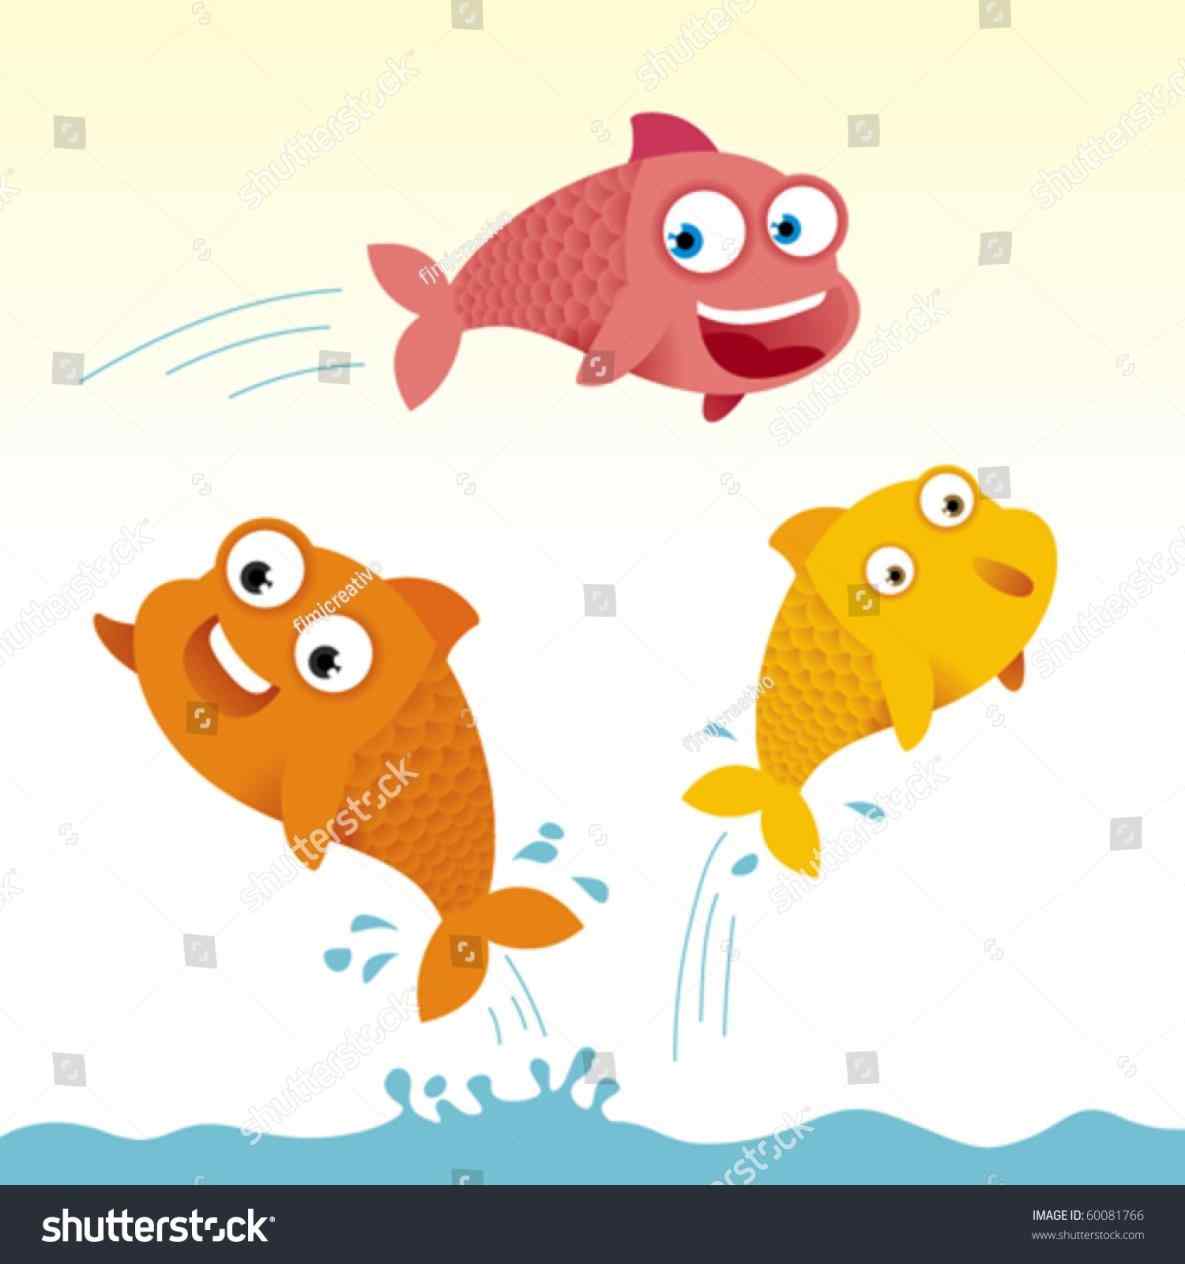 jumping-out-of-water-clipart-tr-fish-stock-illustration-best-line-ioncom-craft-light-best-bass-jumping-out-of-water-clipart-fish.jpg